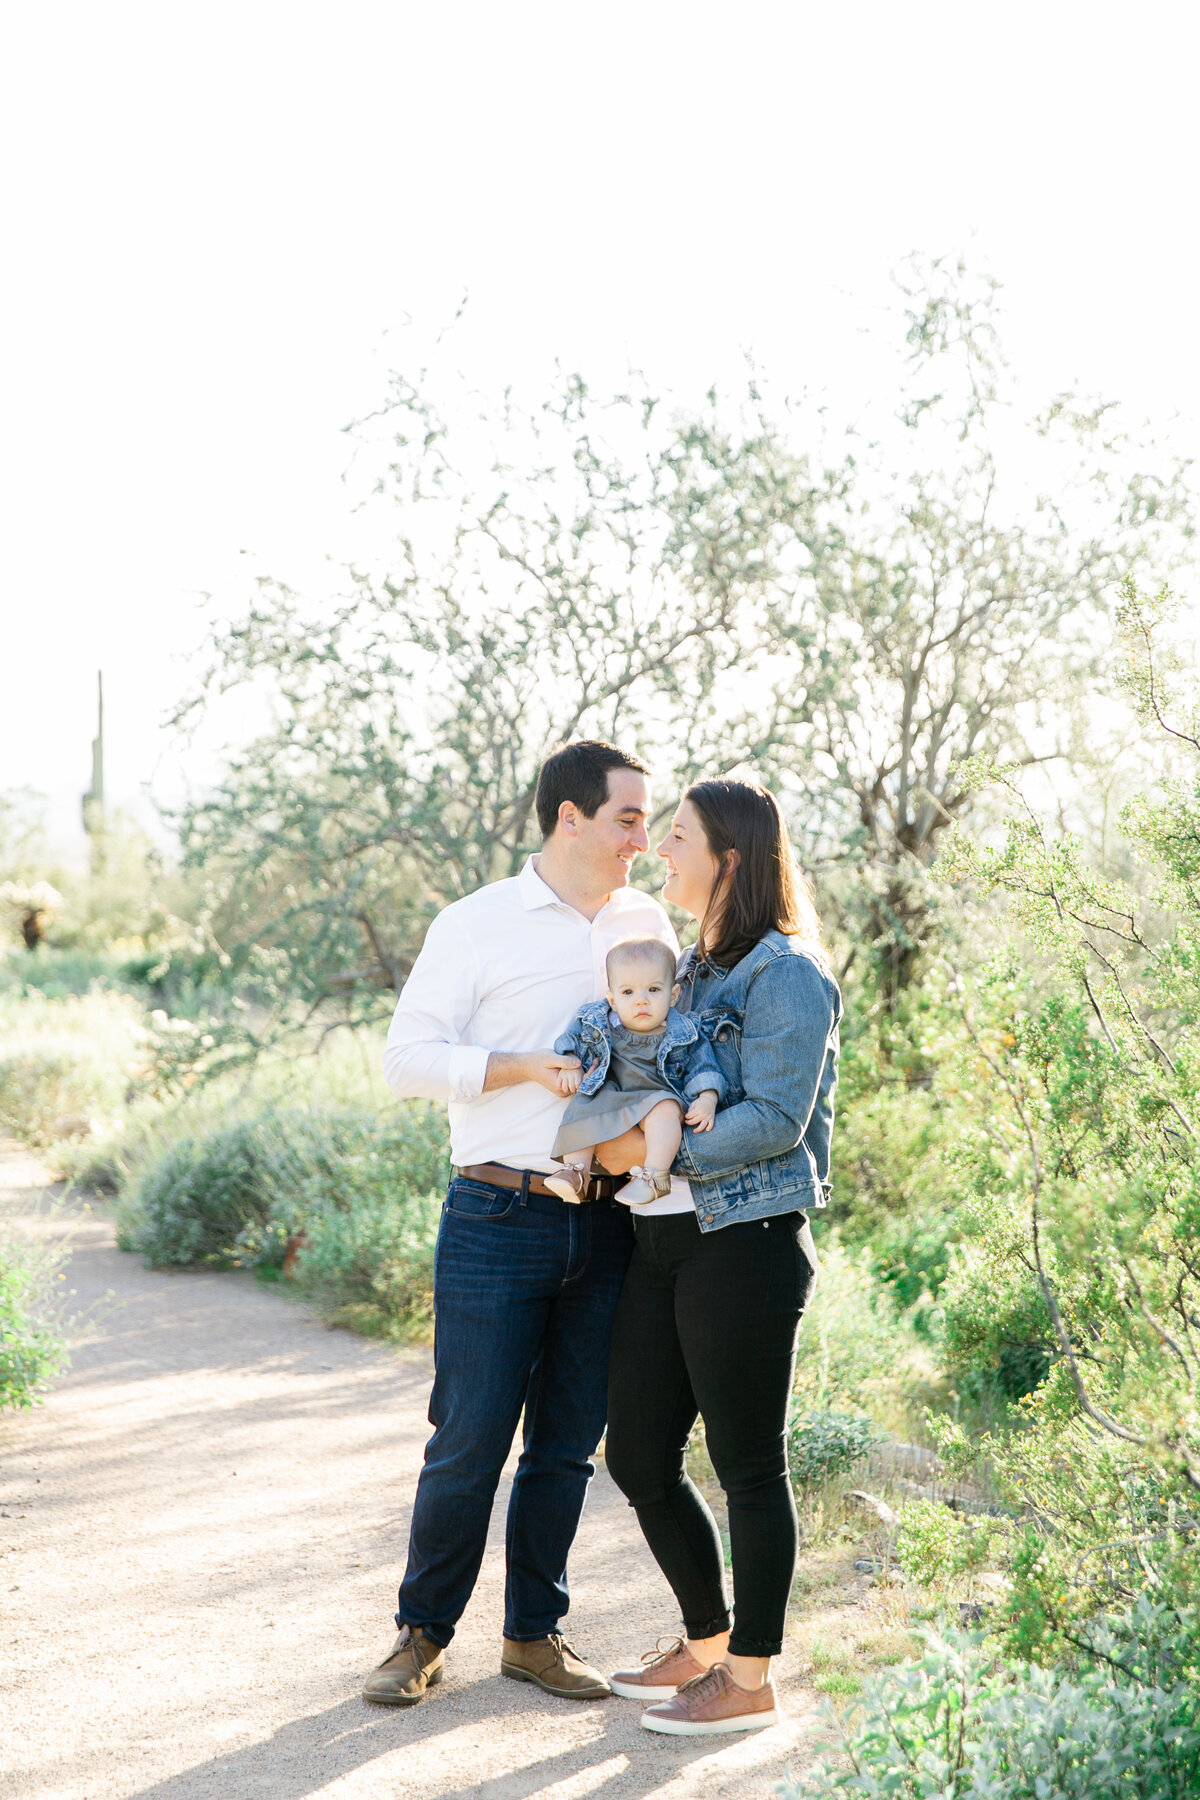 Karlie Colleen Photography - Scottsdale family photography - Victoria & family-4